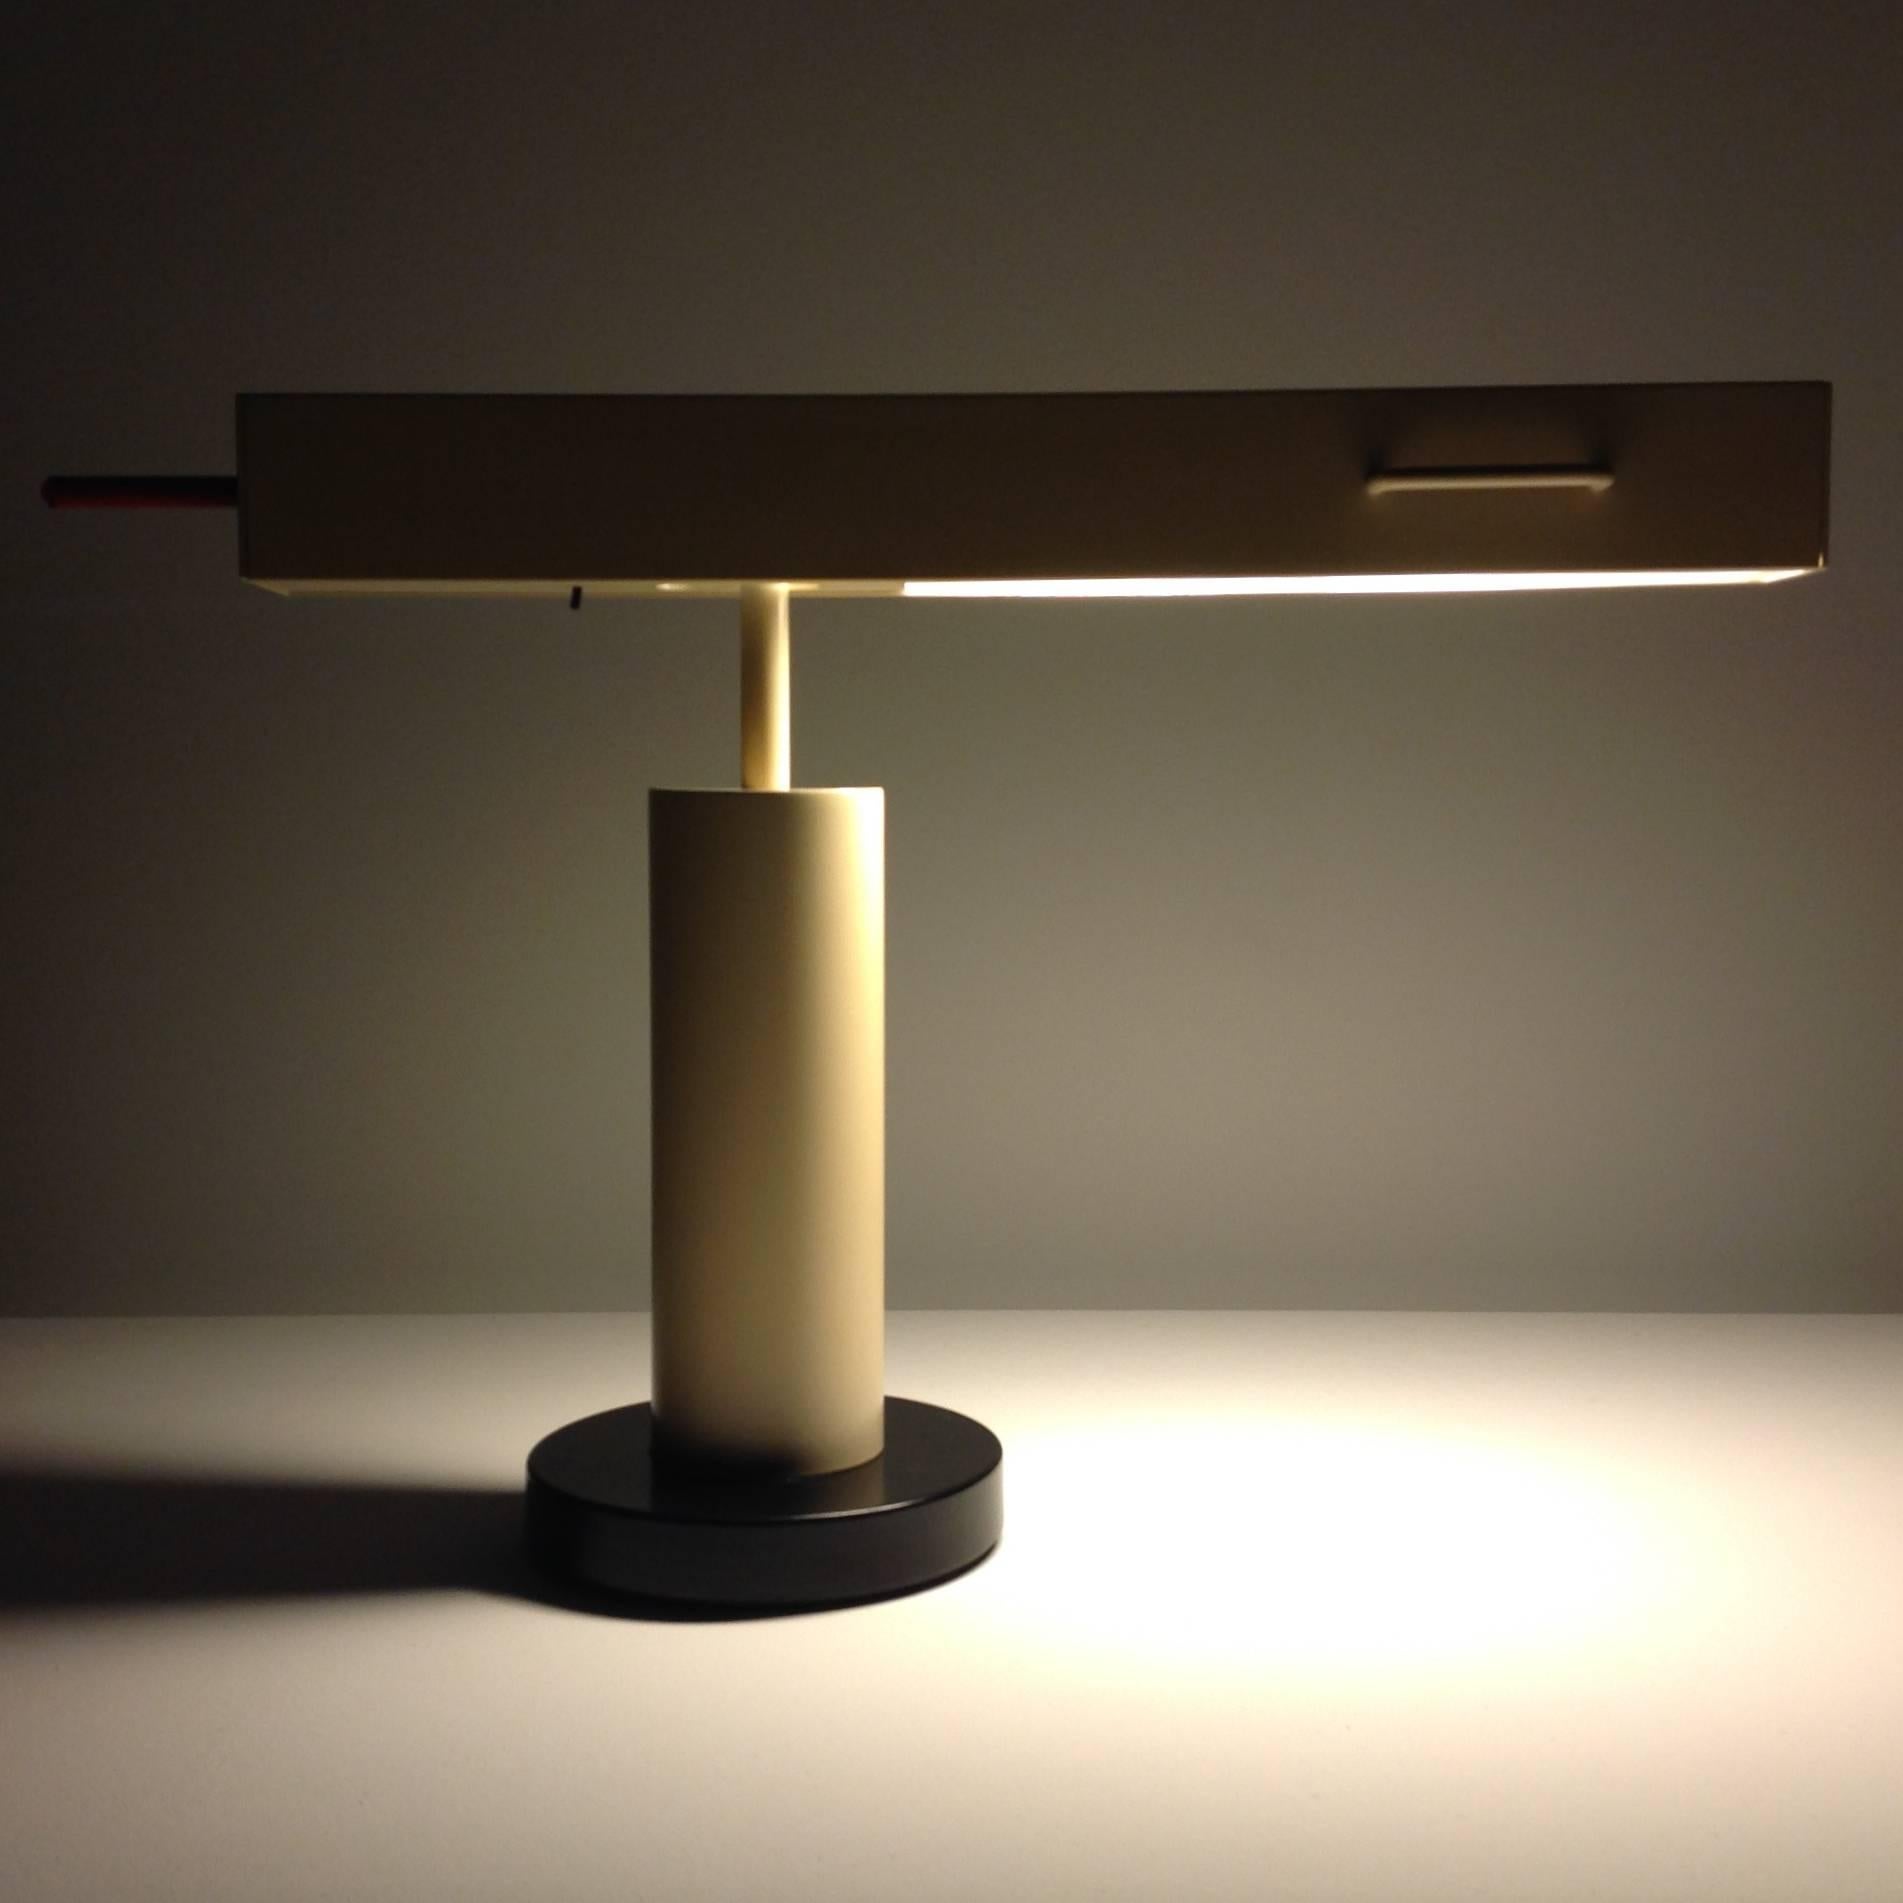 Italian Extremely Rare Desk Lamp Design by Ettore Sottsass, Made in Small Quantity For Sale